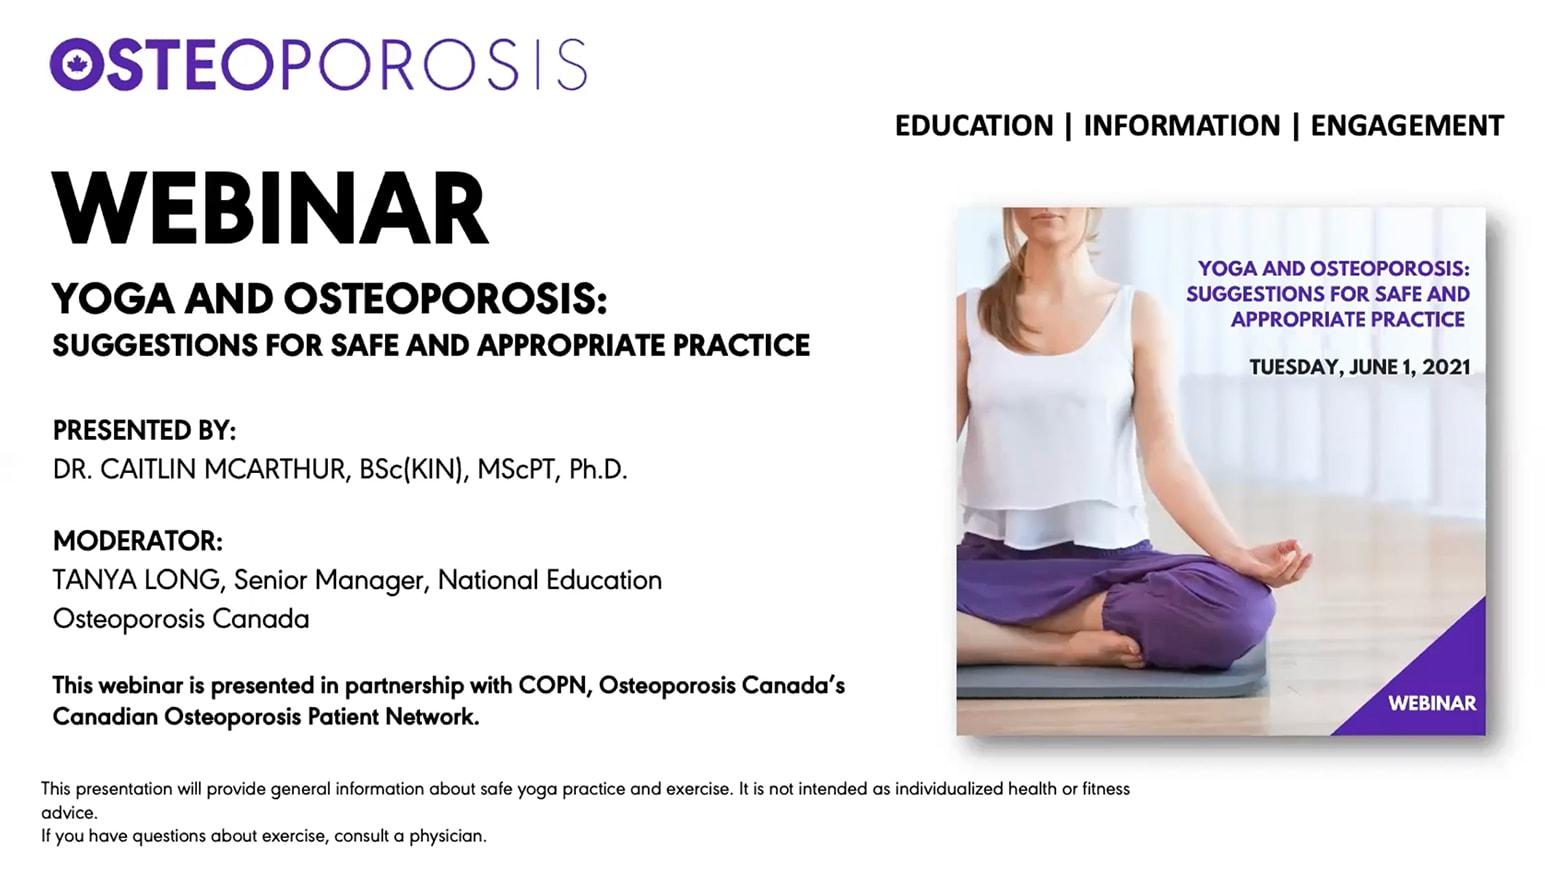 Yoga and Osteoporosis: Suggestions for Safe and Appropriate Practice